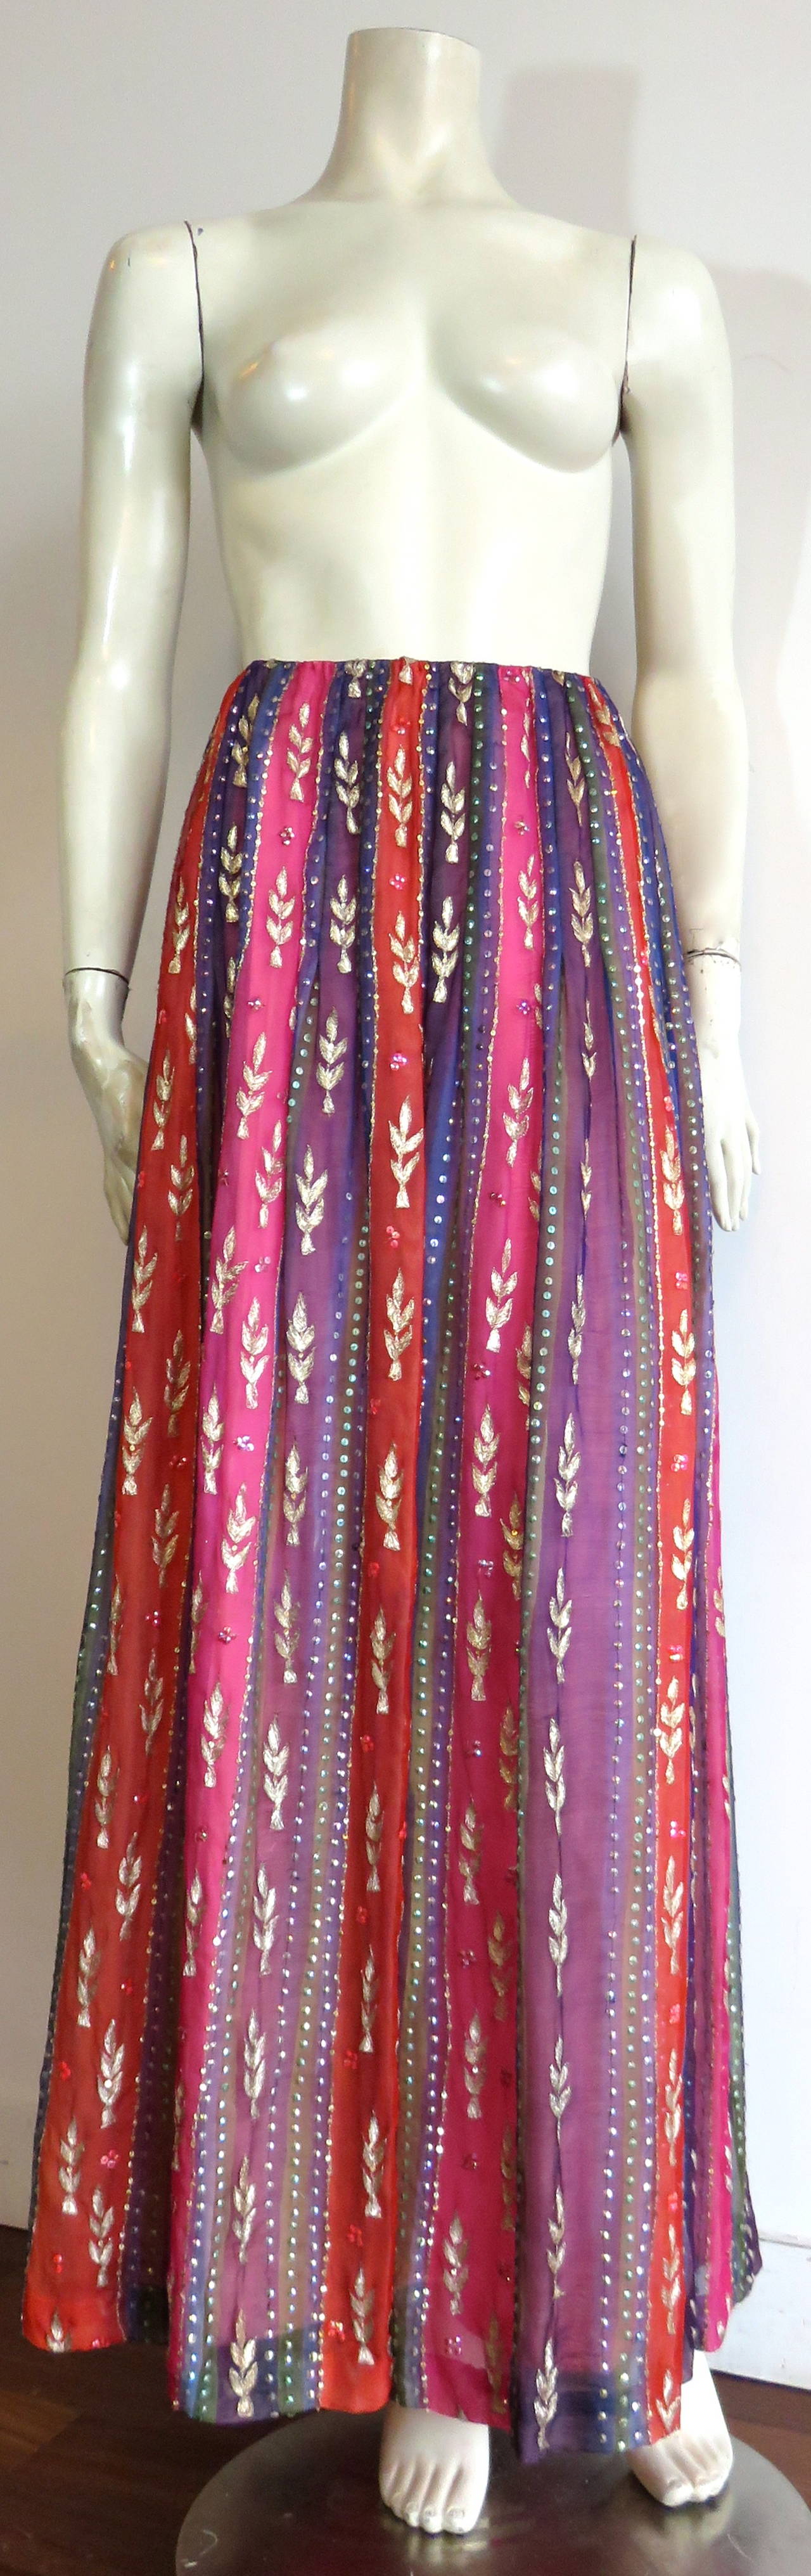 1970's GIVENCHY Haute Couture embellished silk skirt For Sale at 1stDibs